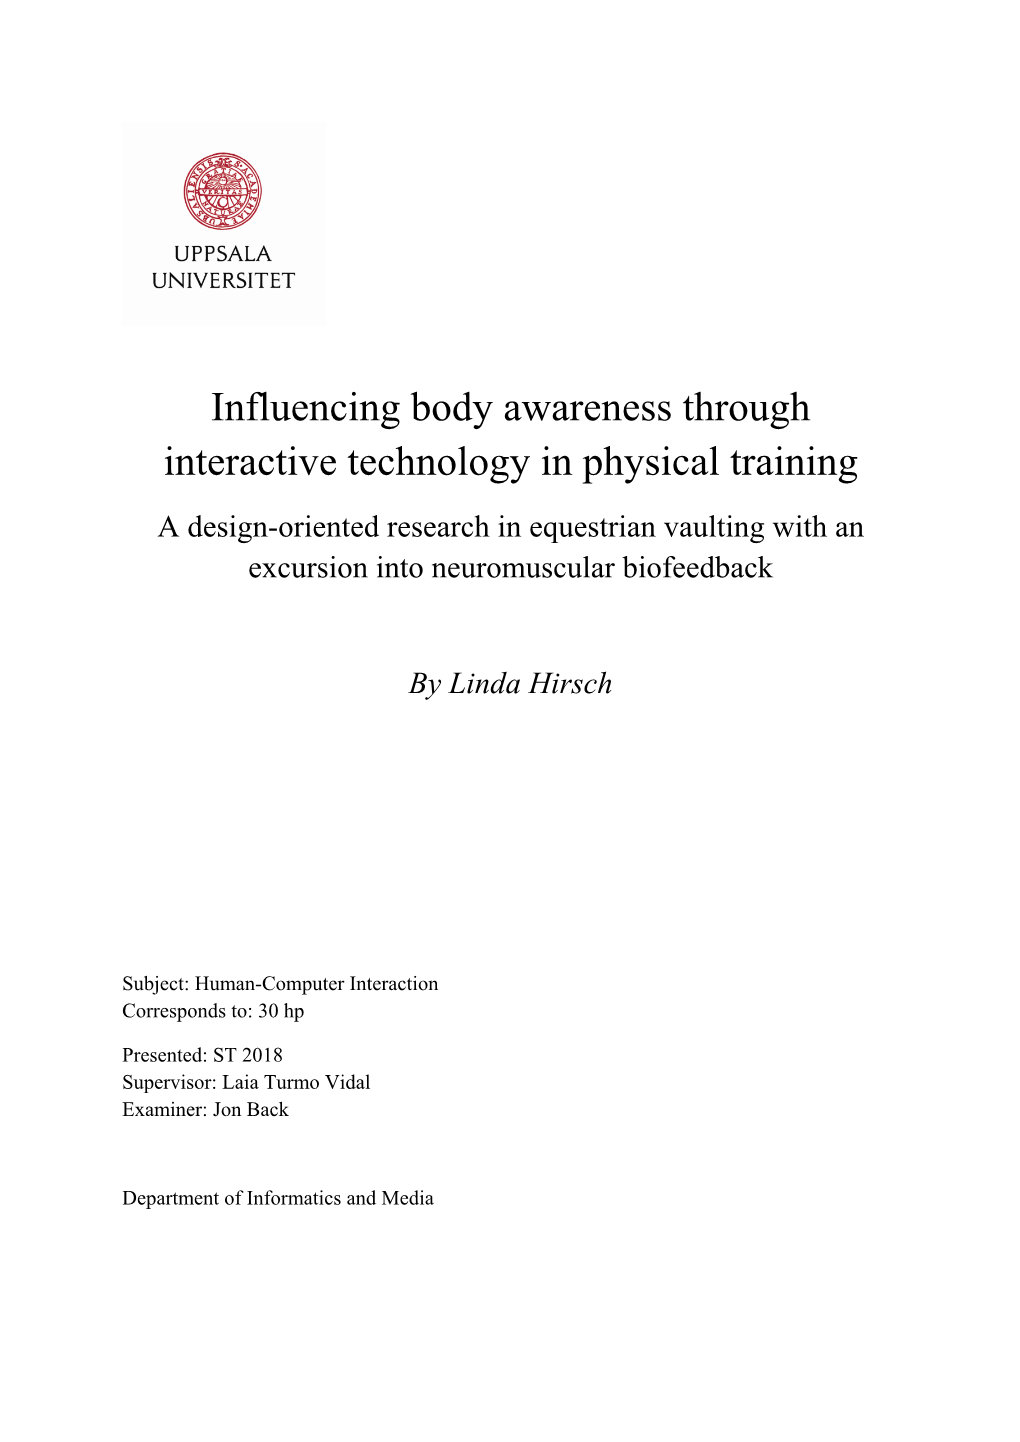 Influencing Body Awareness Through Interactive Technology in Physical